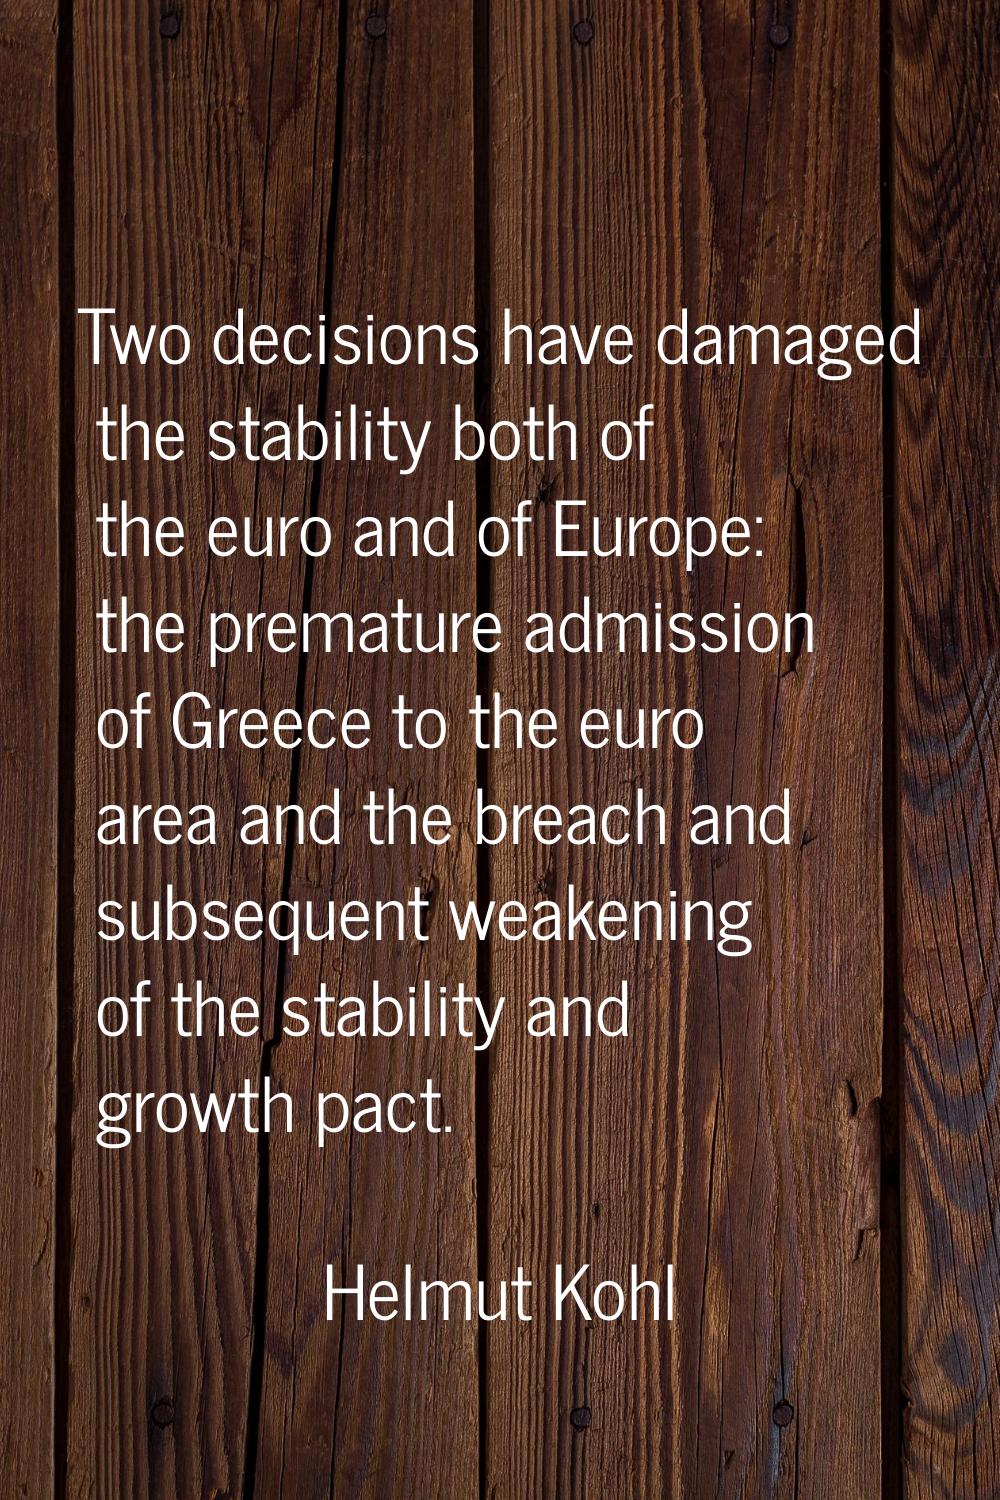 Two decisions have damaged the stability both of the euro and of Europe: the premature admission of